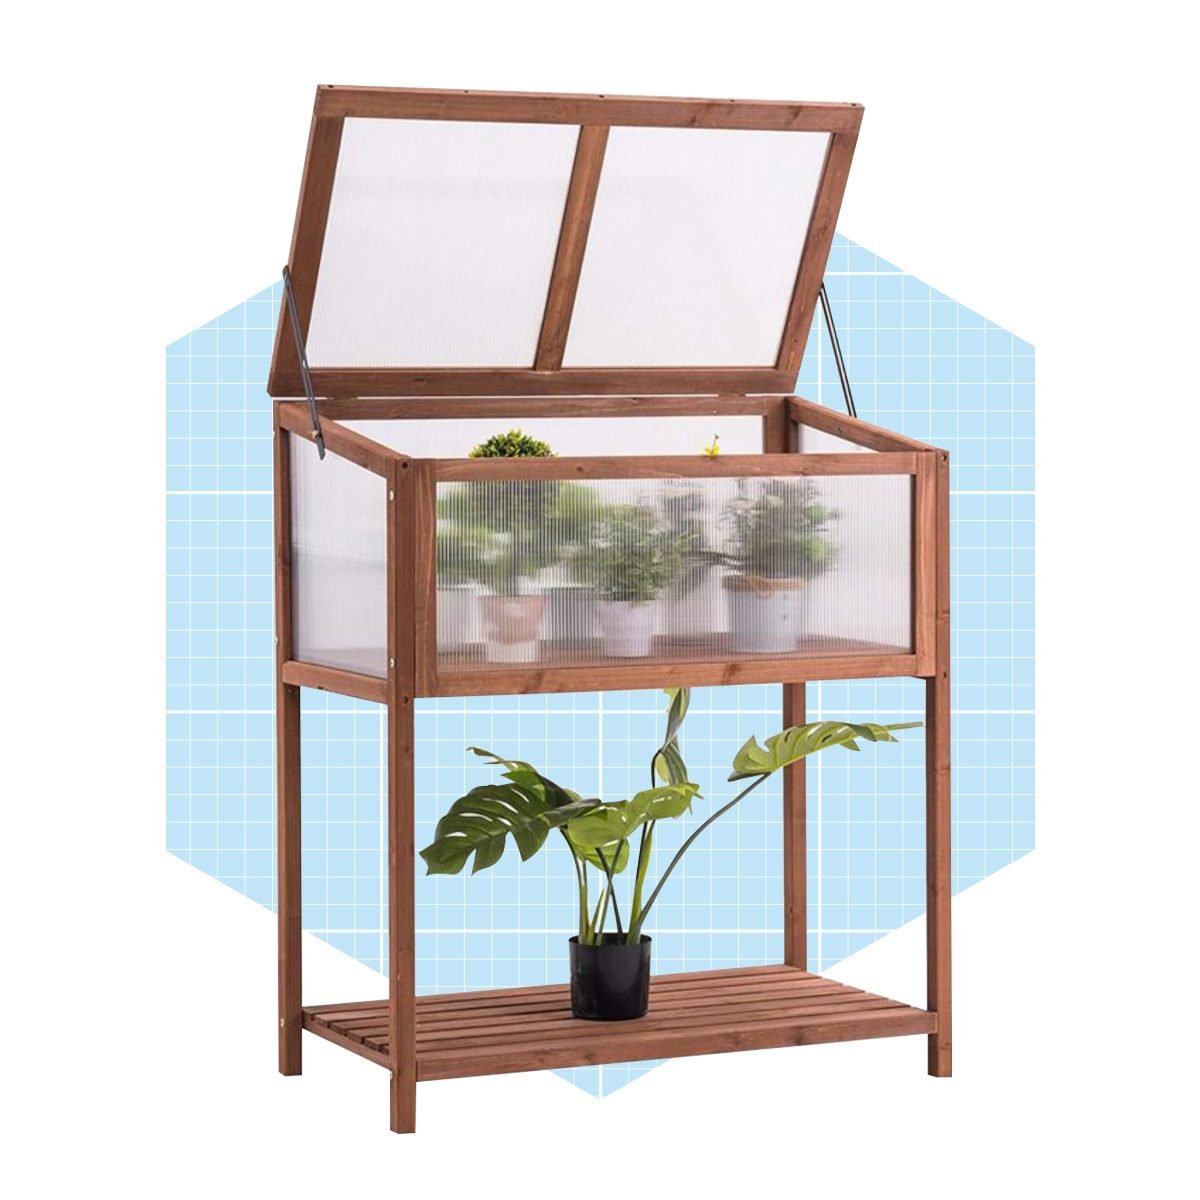 Mcombo Portable Outdoor:indoor Polished Wooden Cold Frame Greenhouse With Polycarbonate Panels Ecomm Target.com